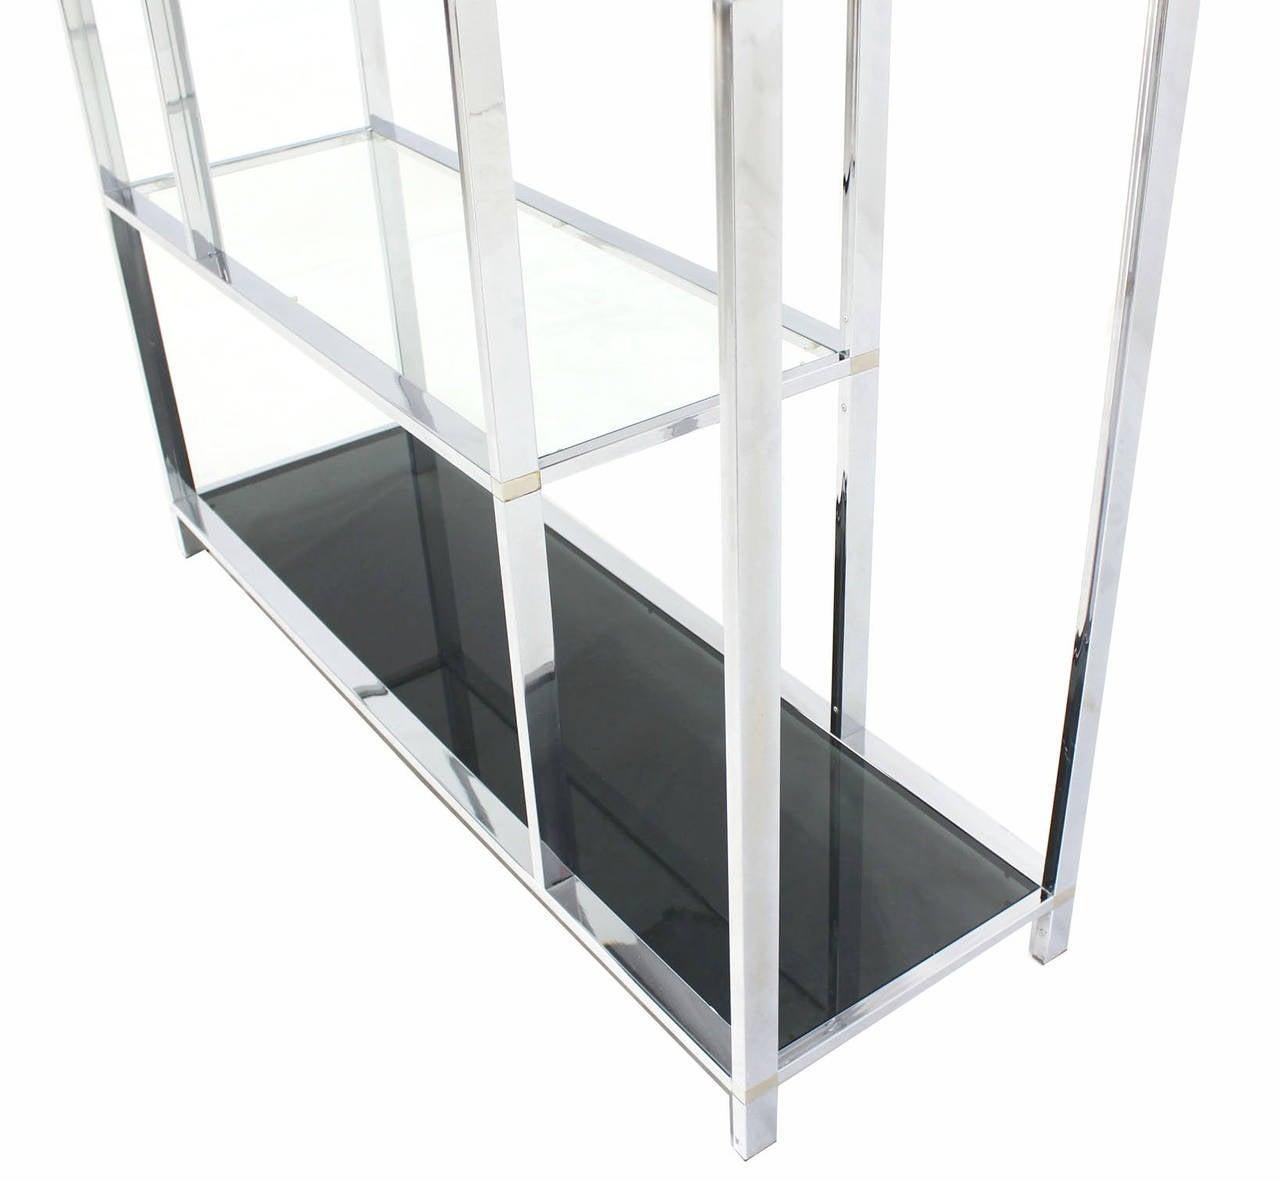 American Large Wide Chrome Smoked Glass Double Dome Shade Etagere Shelving Wall Unit MINT For Sale